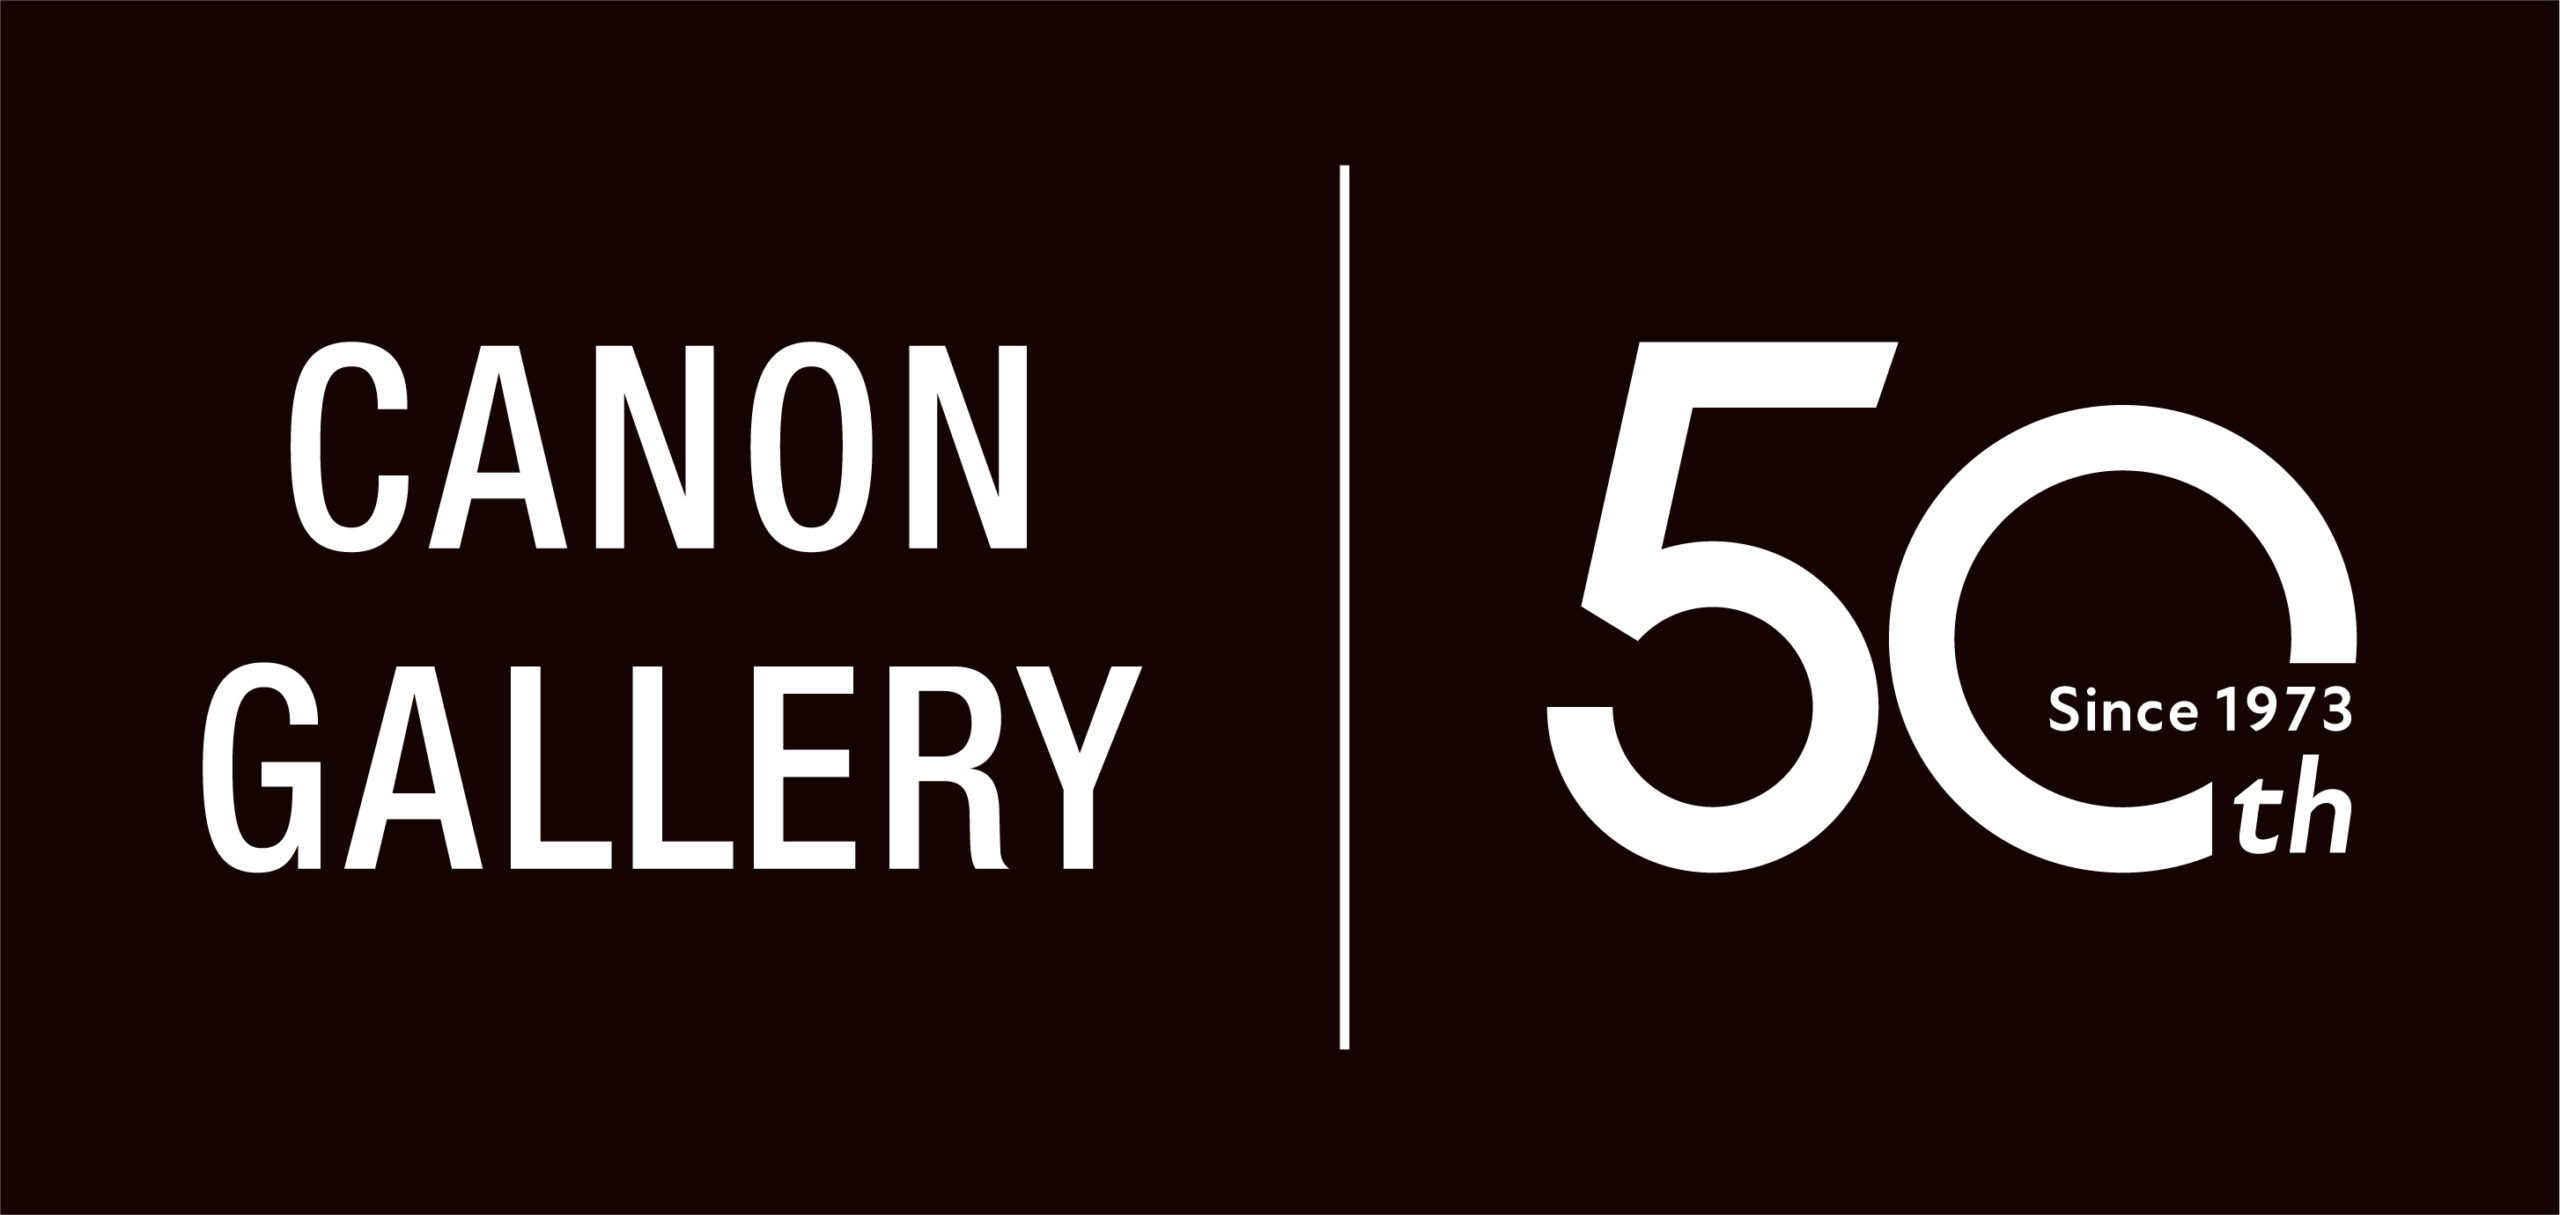 CANON GALLERY 50th ロゴ